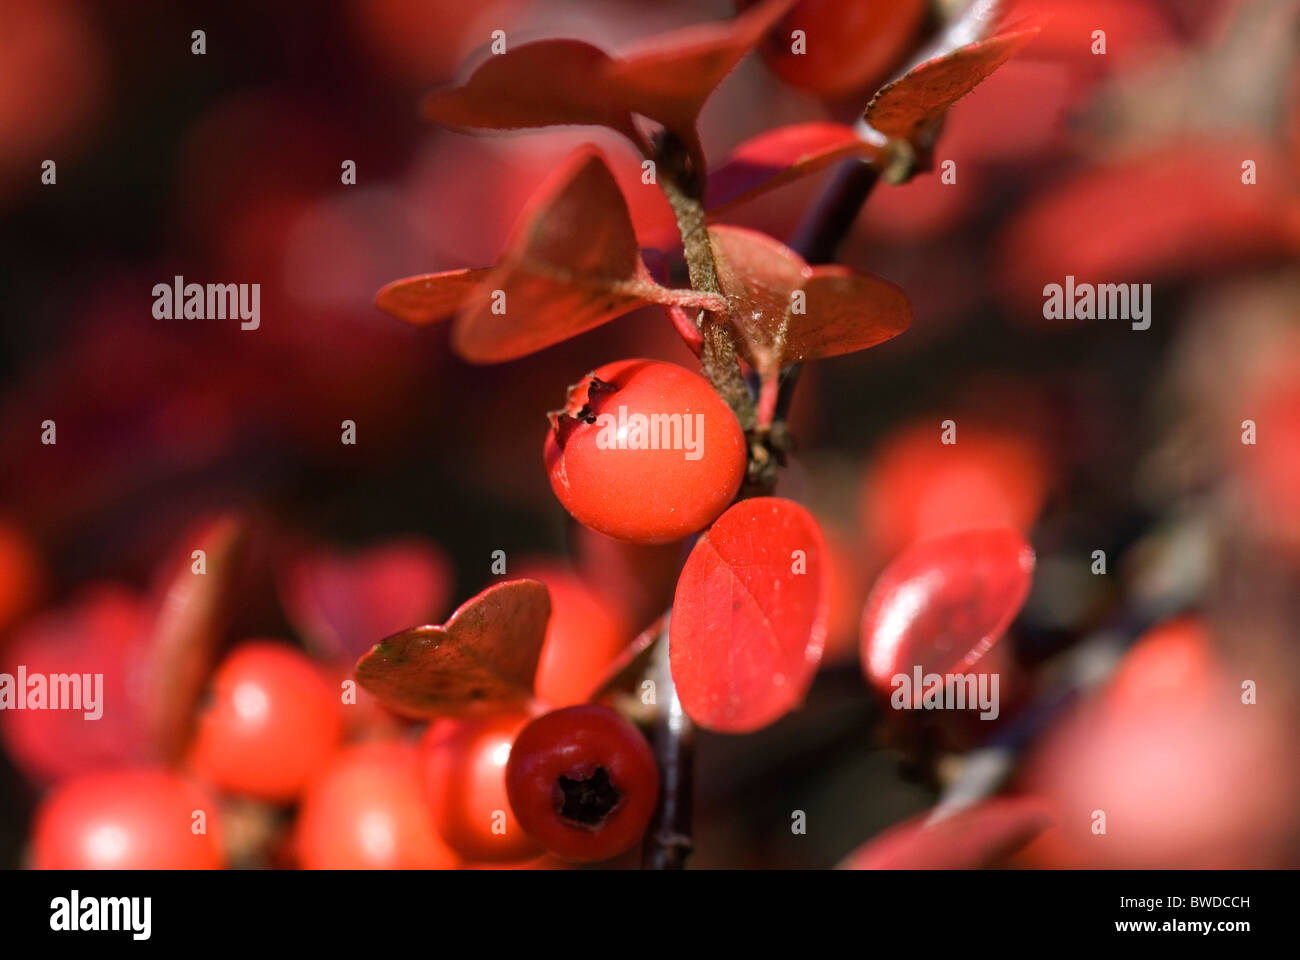 Cotoneaster Stock Photo